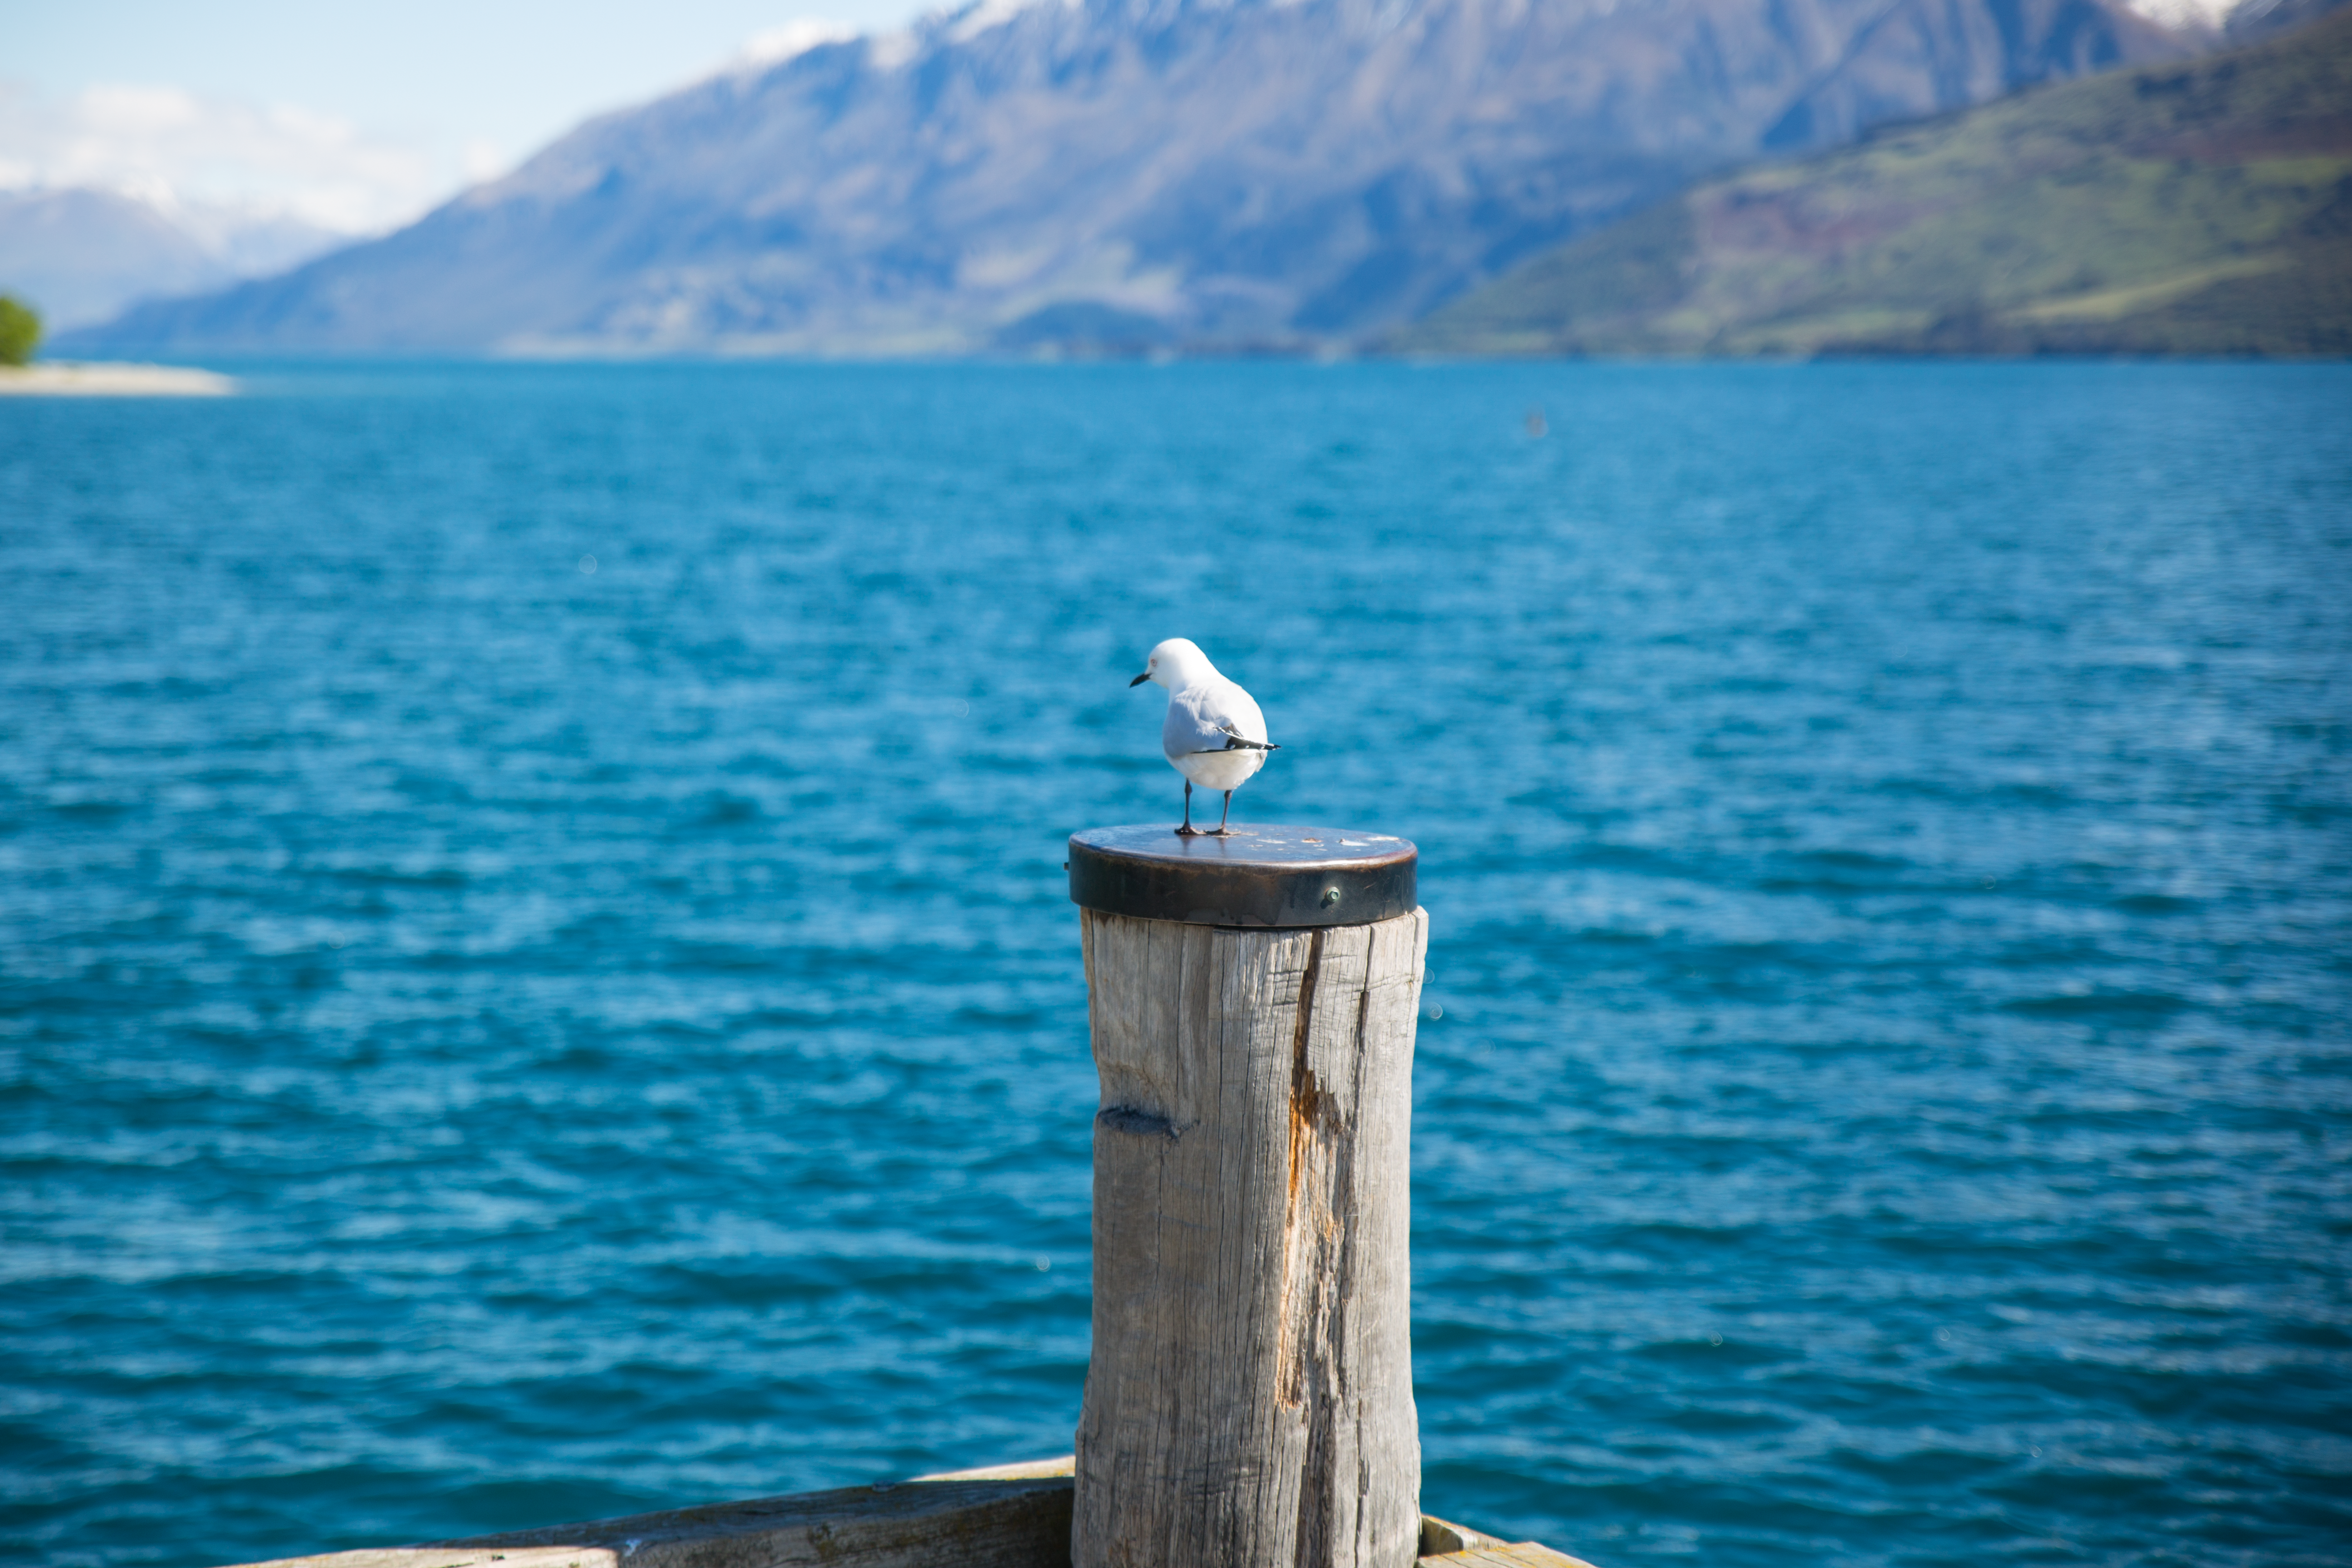 Depth of Field Photography of White Gull on Top of Brown Wooden Pole in Front of Body of Water, Bay, Outdoors, Wood, Waves, HQ Photo